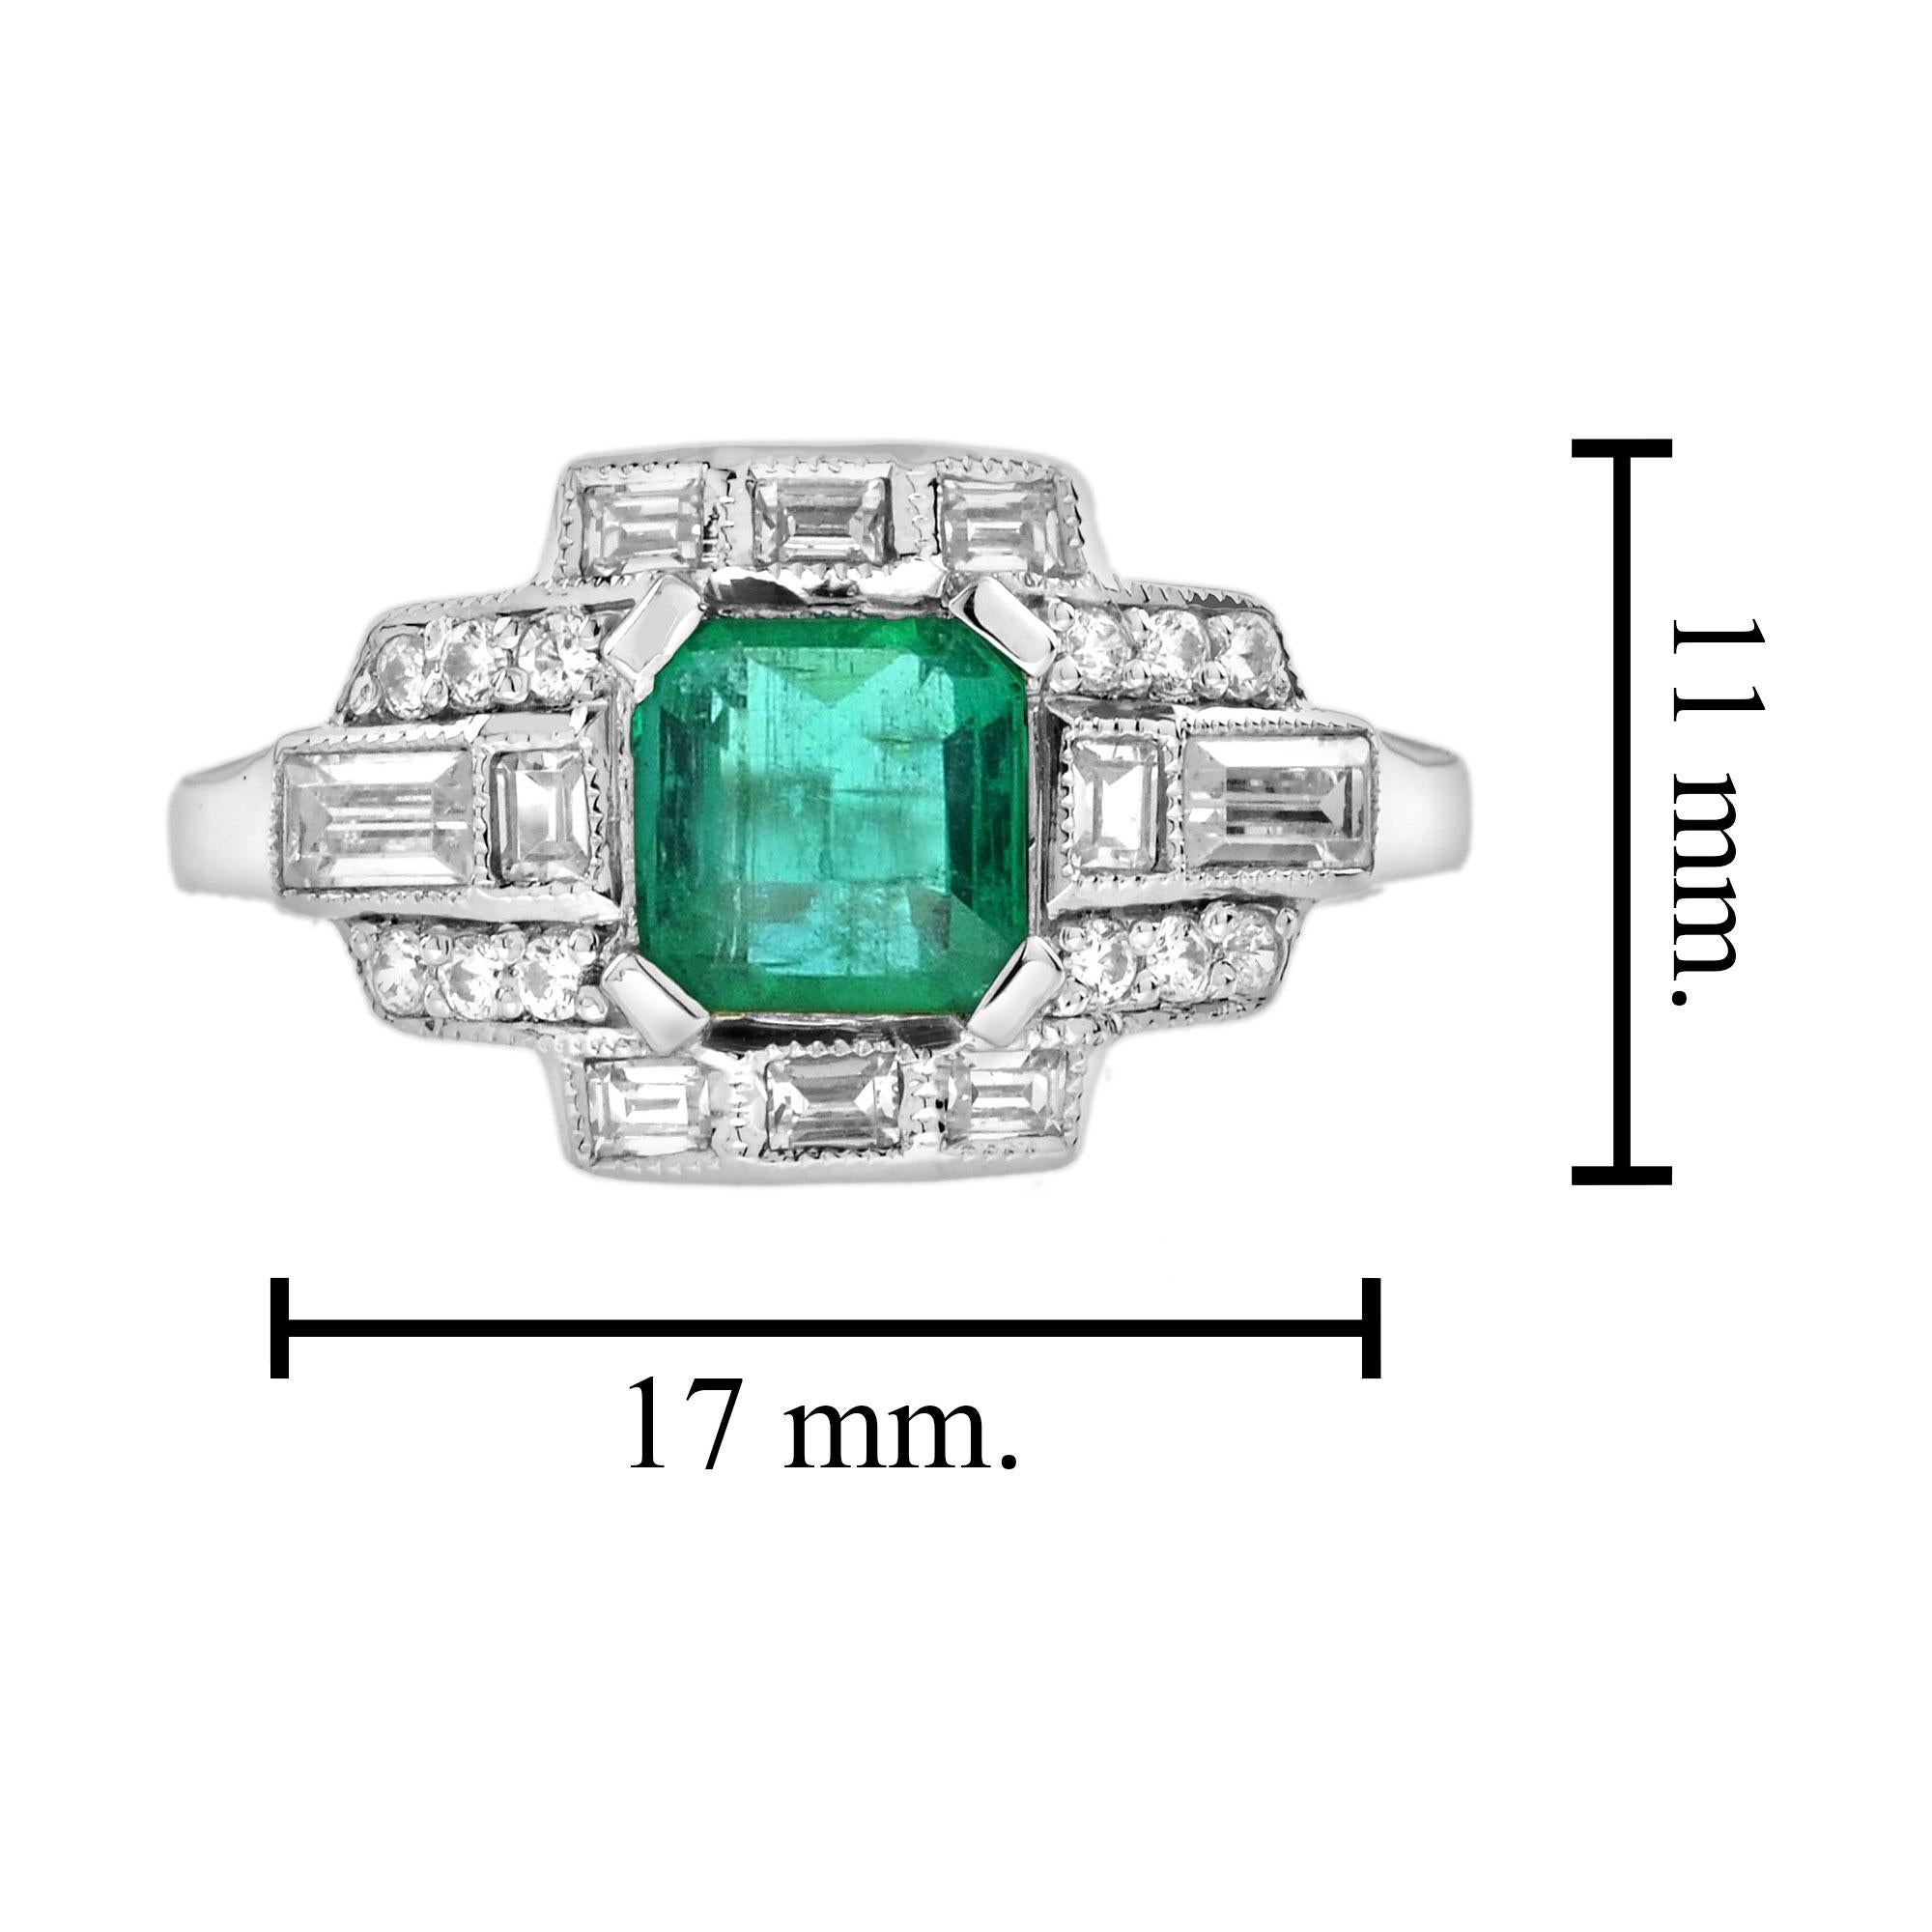 1.65 Ct. Emerald and Diamond Art Deco Style Engagement Ring in 18K White Gold For Sale 2